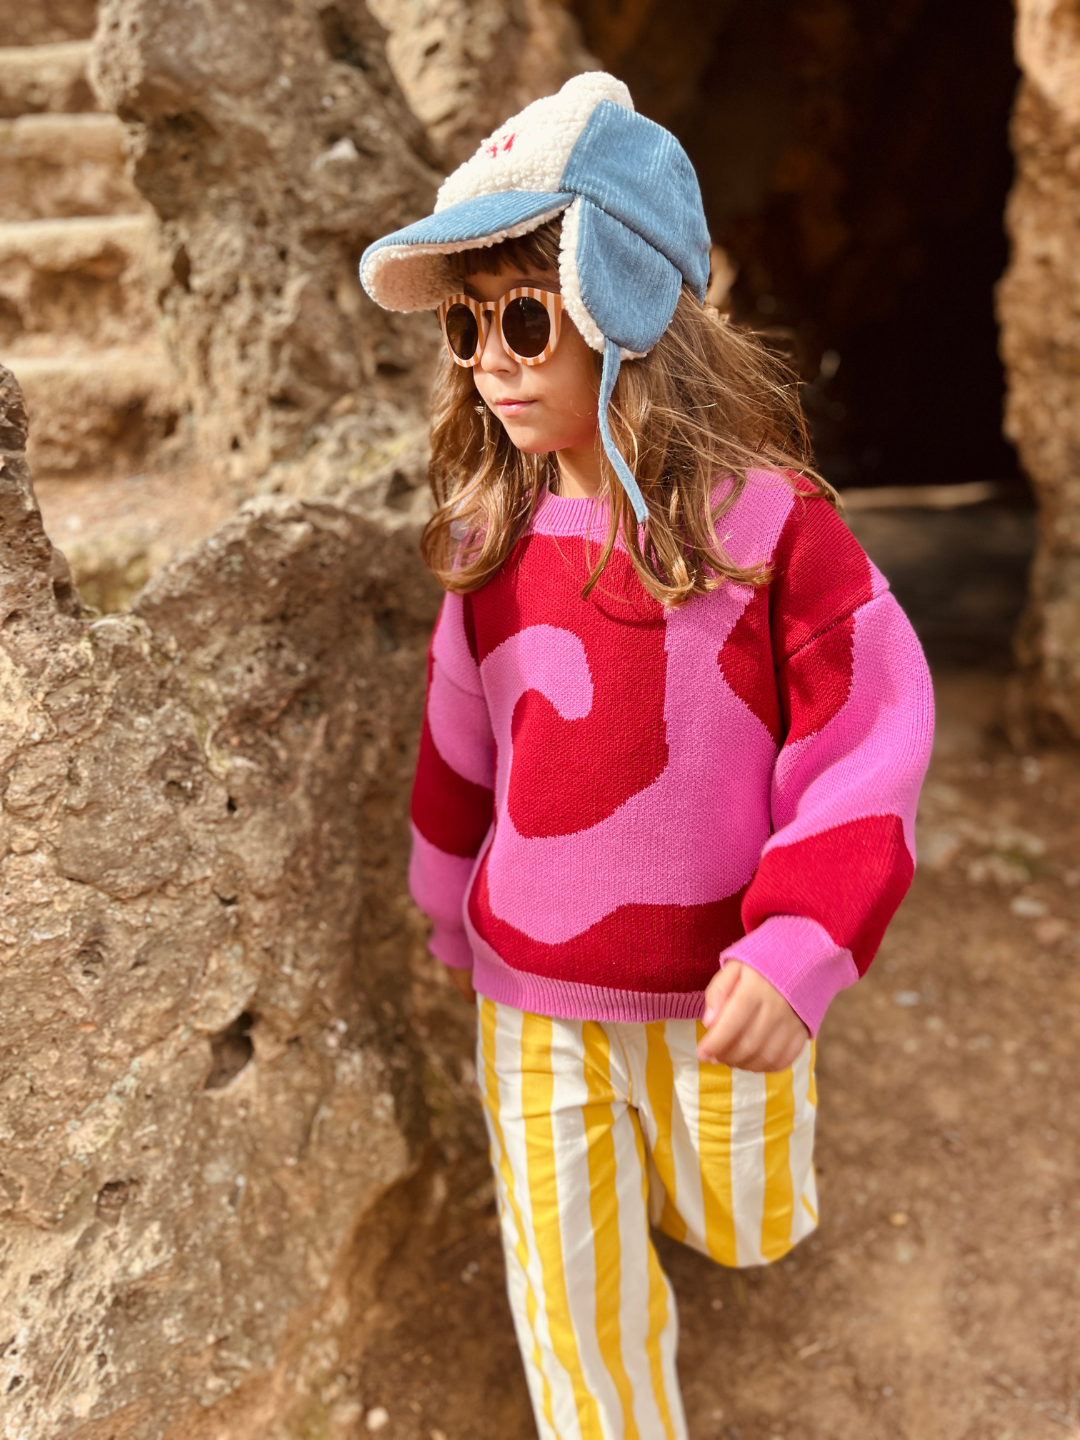 Raspberry | A girl wearing a kids crewneck sweater in bright pink, with a large single red swirl design that covers the entire sweater. She is is walking in front of a brown stone wall, and also wears yellow-and-white vertical striped pants, a blue cap with ear flats, and rust and white striped sunglasses.